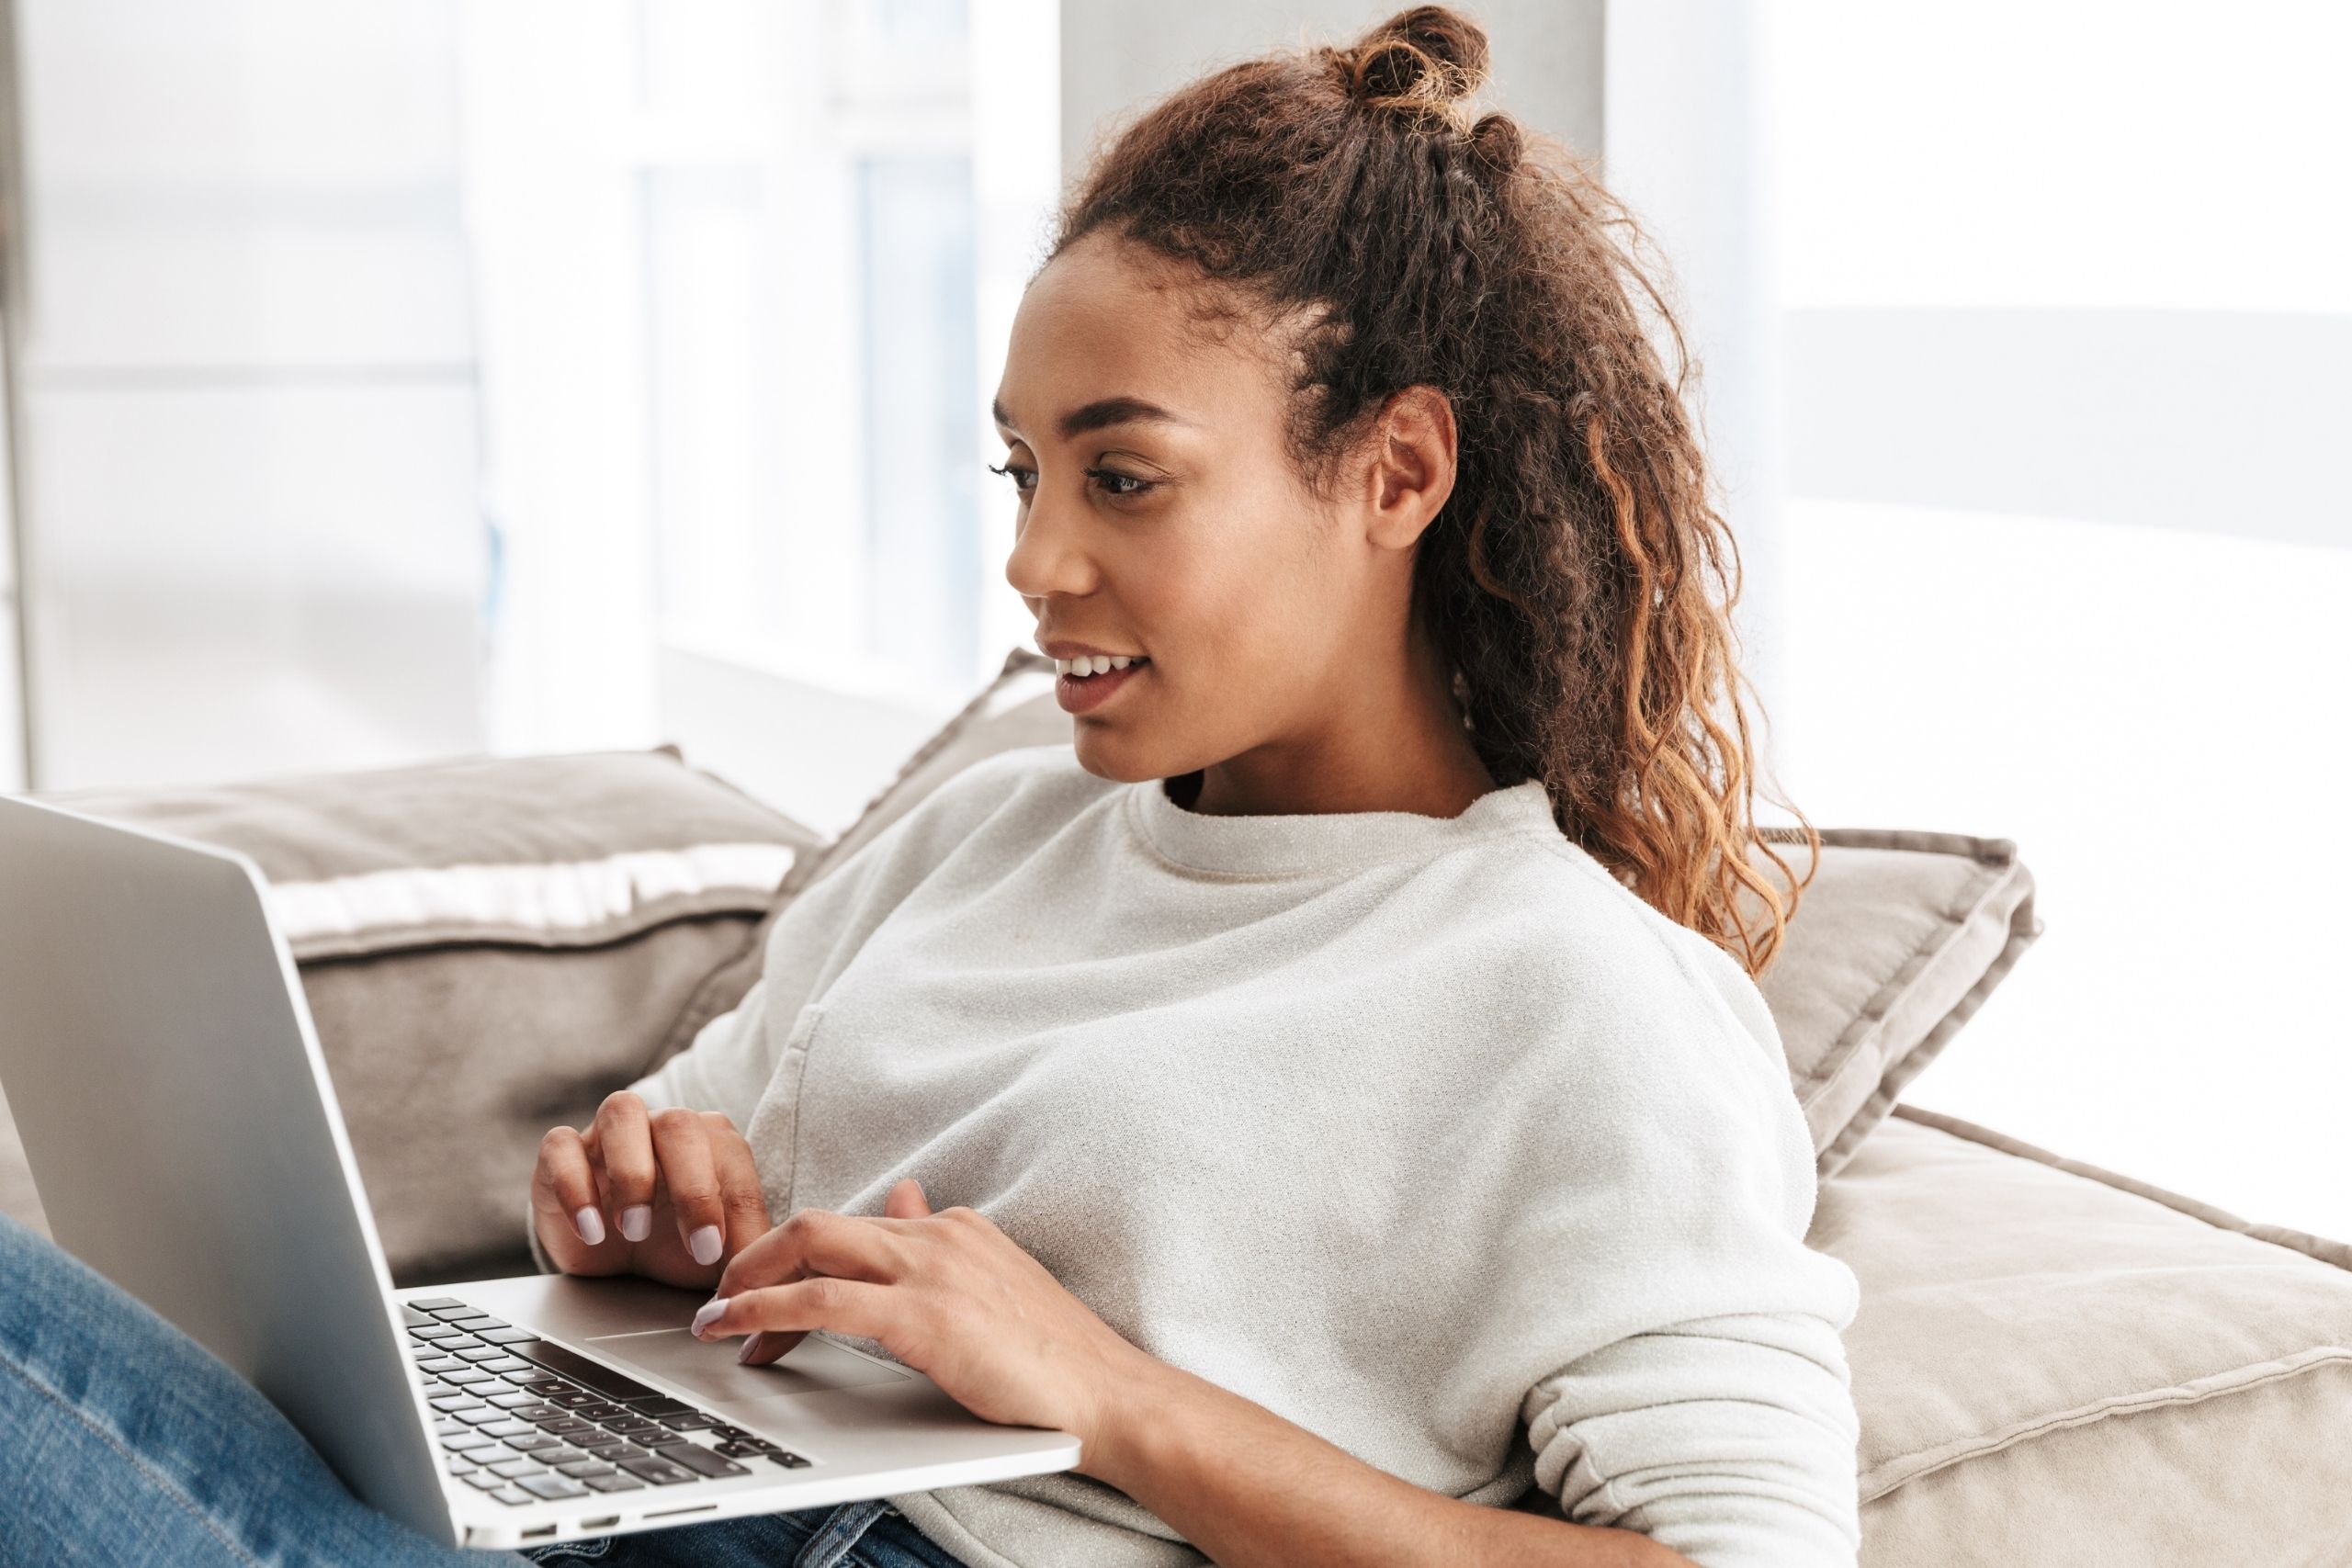 Woman with half hair tied back sitting on sofa using laptop